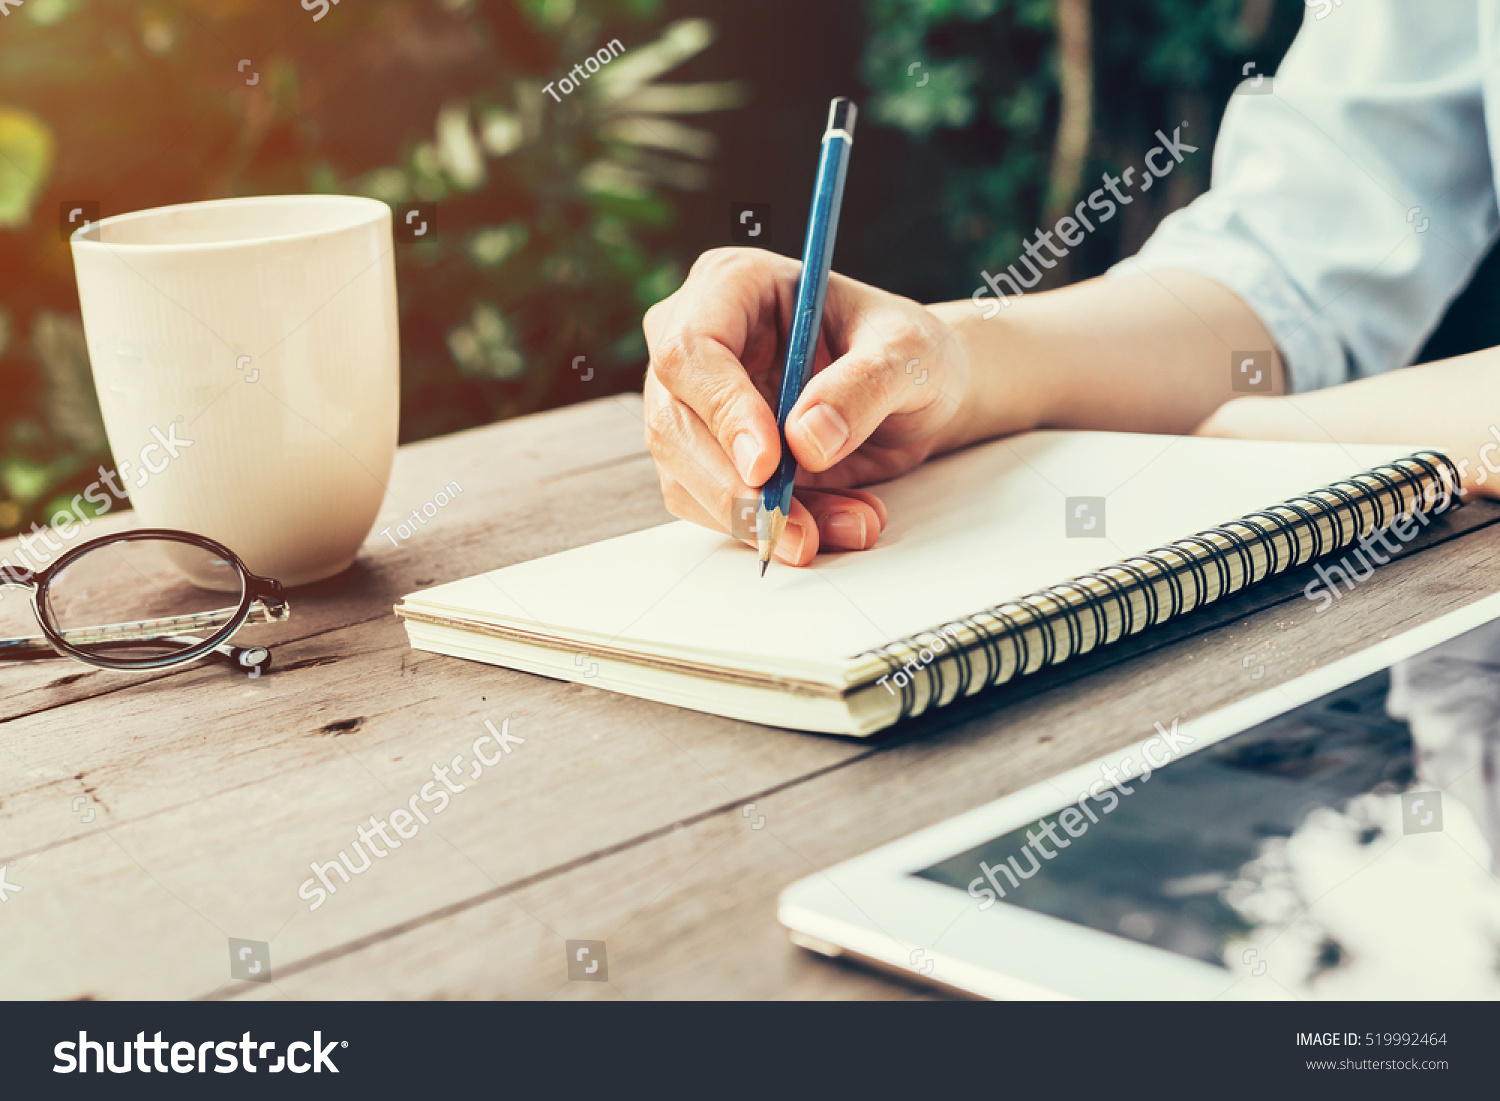 Woman hand with pencil writing on notebook at coffee shop. Woman working in outdoor at coffee shop. #519992464